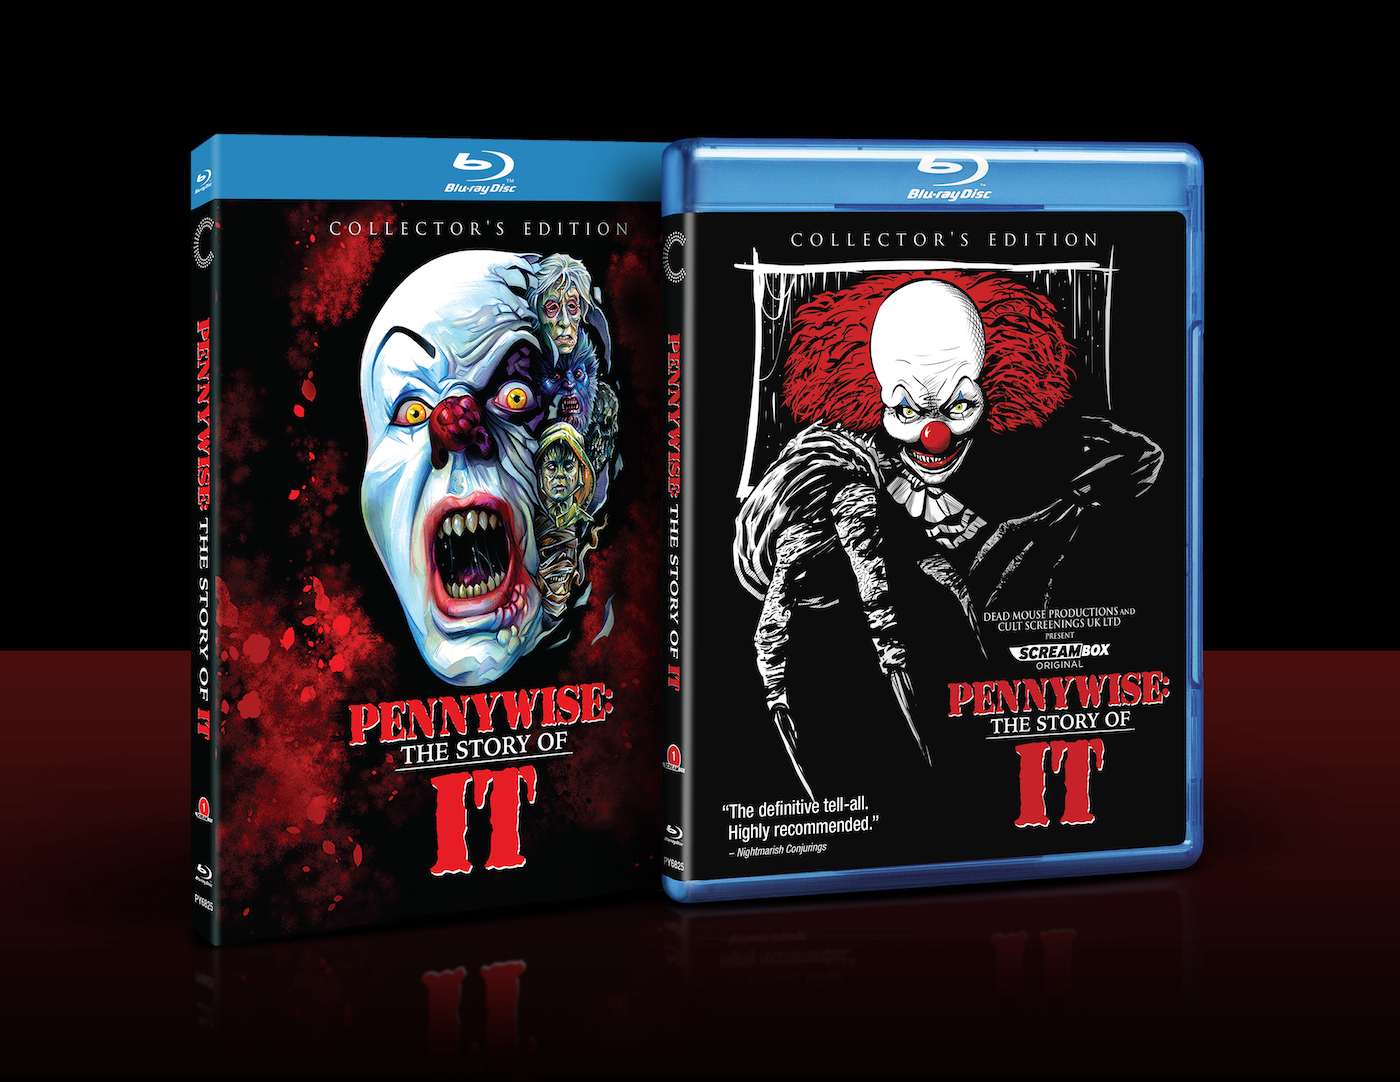 Pennywise: The Story of IT Scares up a Collector's Edition Blu-ray!